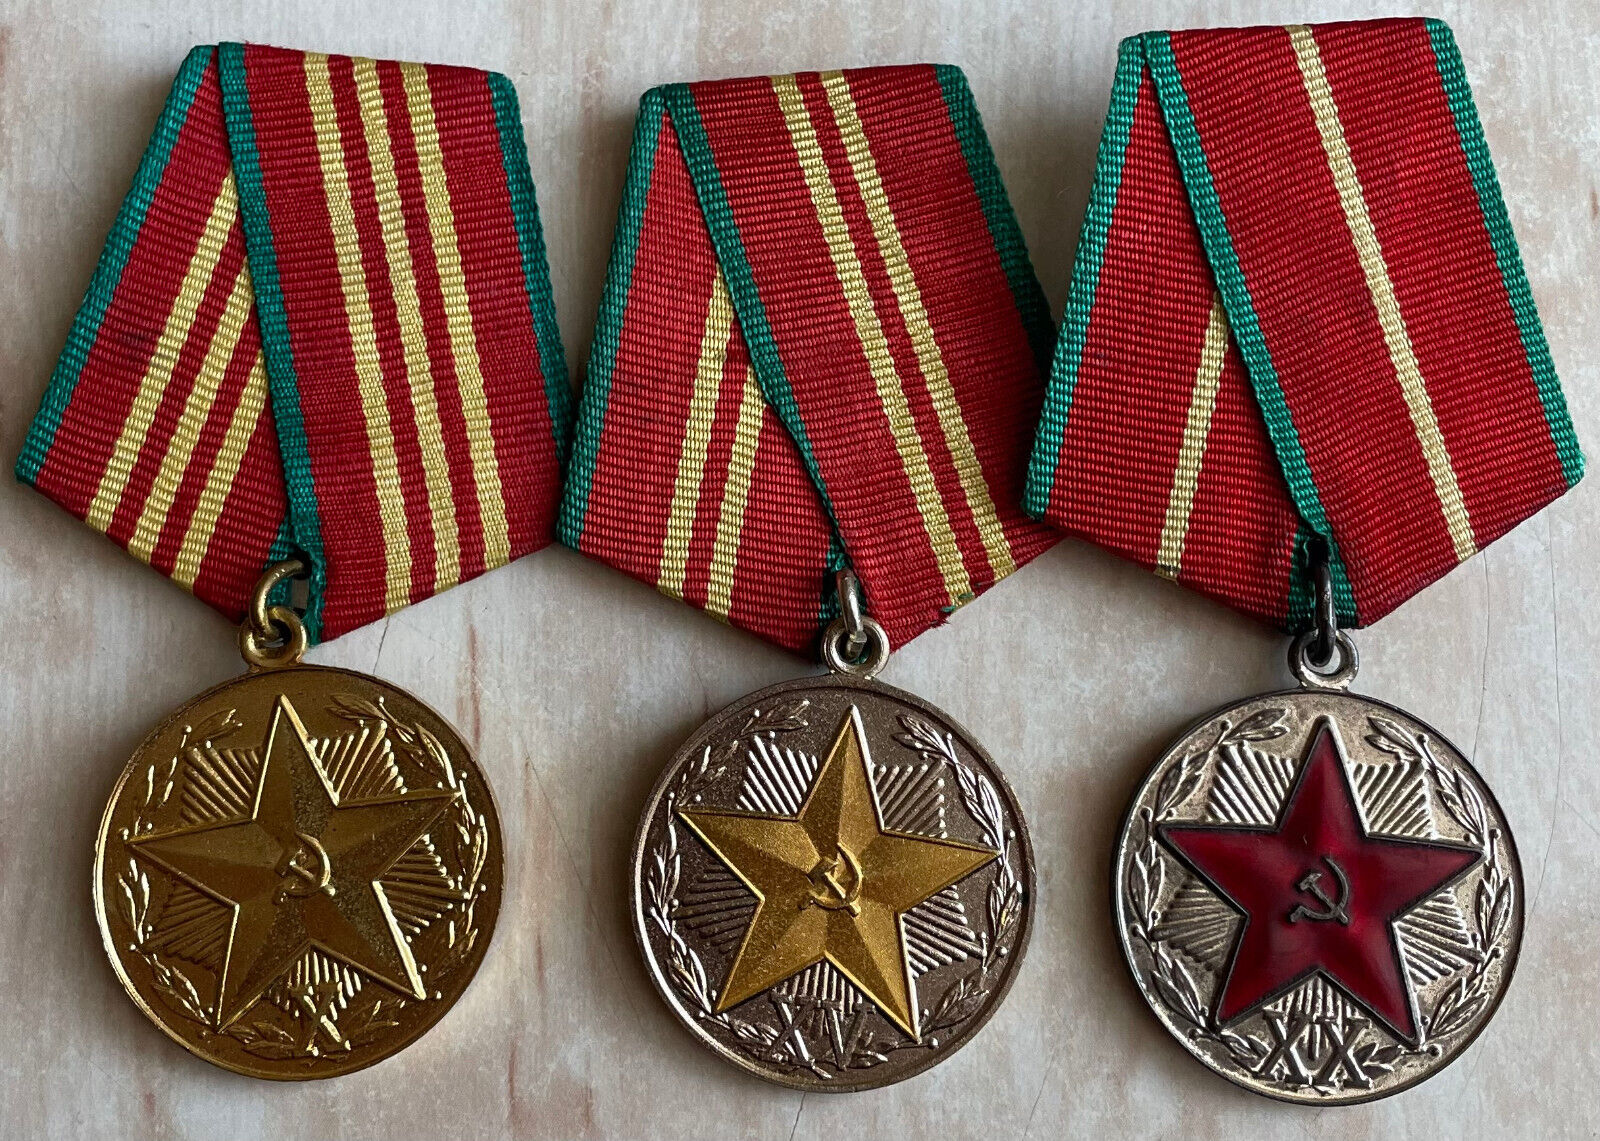 KGB USSR Medals For Impeccable Service in KGB. Full Set. 1970s 10 15 20 Years